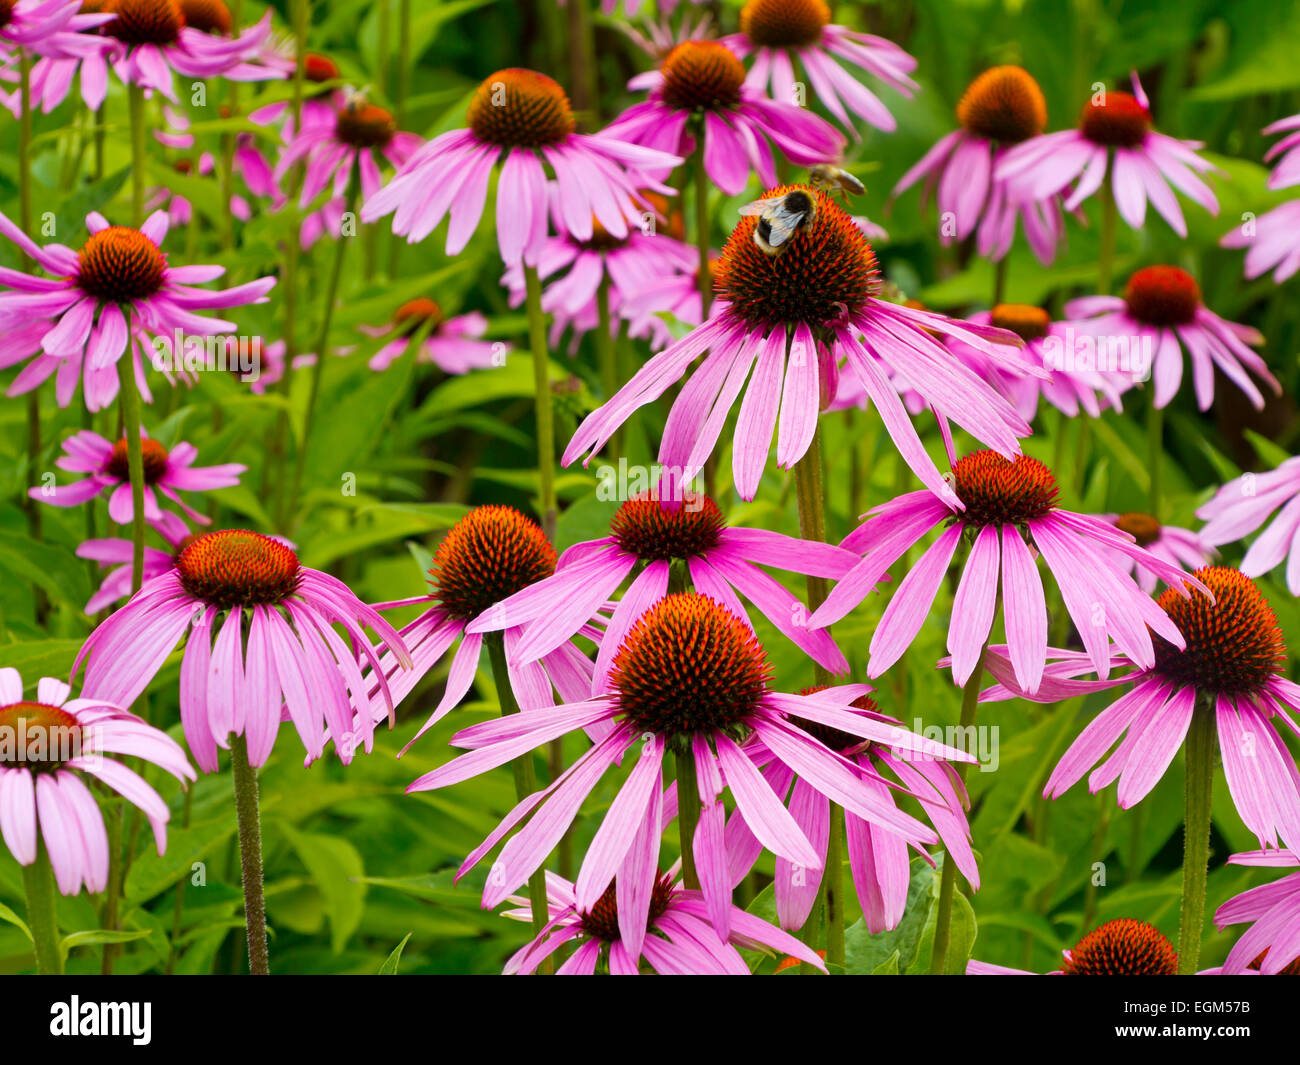 Bee on Echinacea purpurea flowers growing in summer an herbaceous flowering plant with medicinal uses also known as coneflower Stock Photo